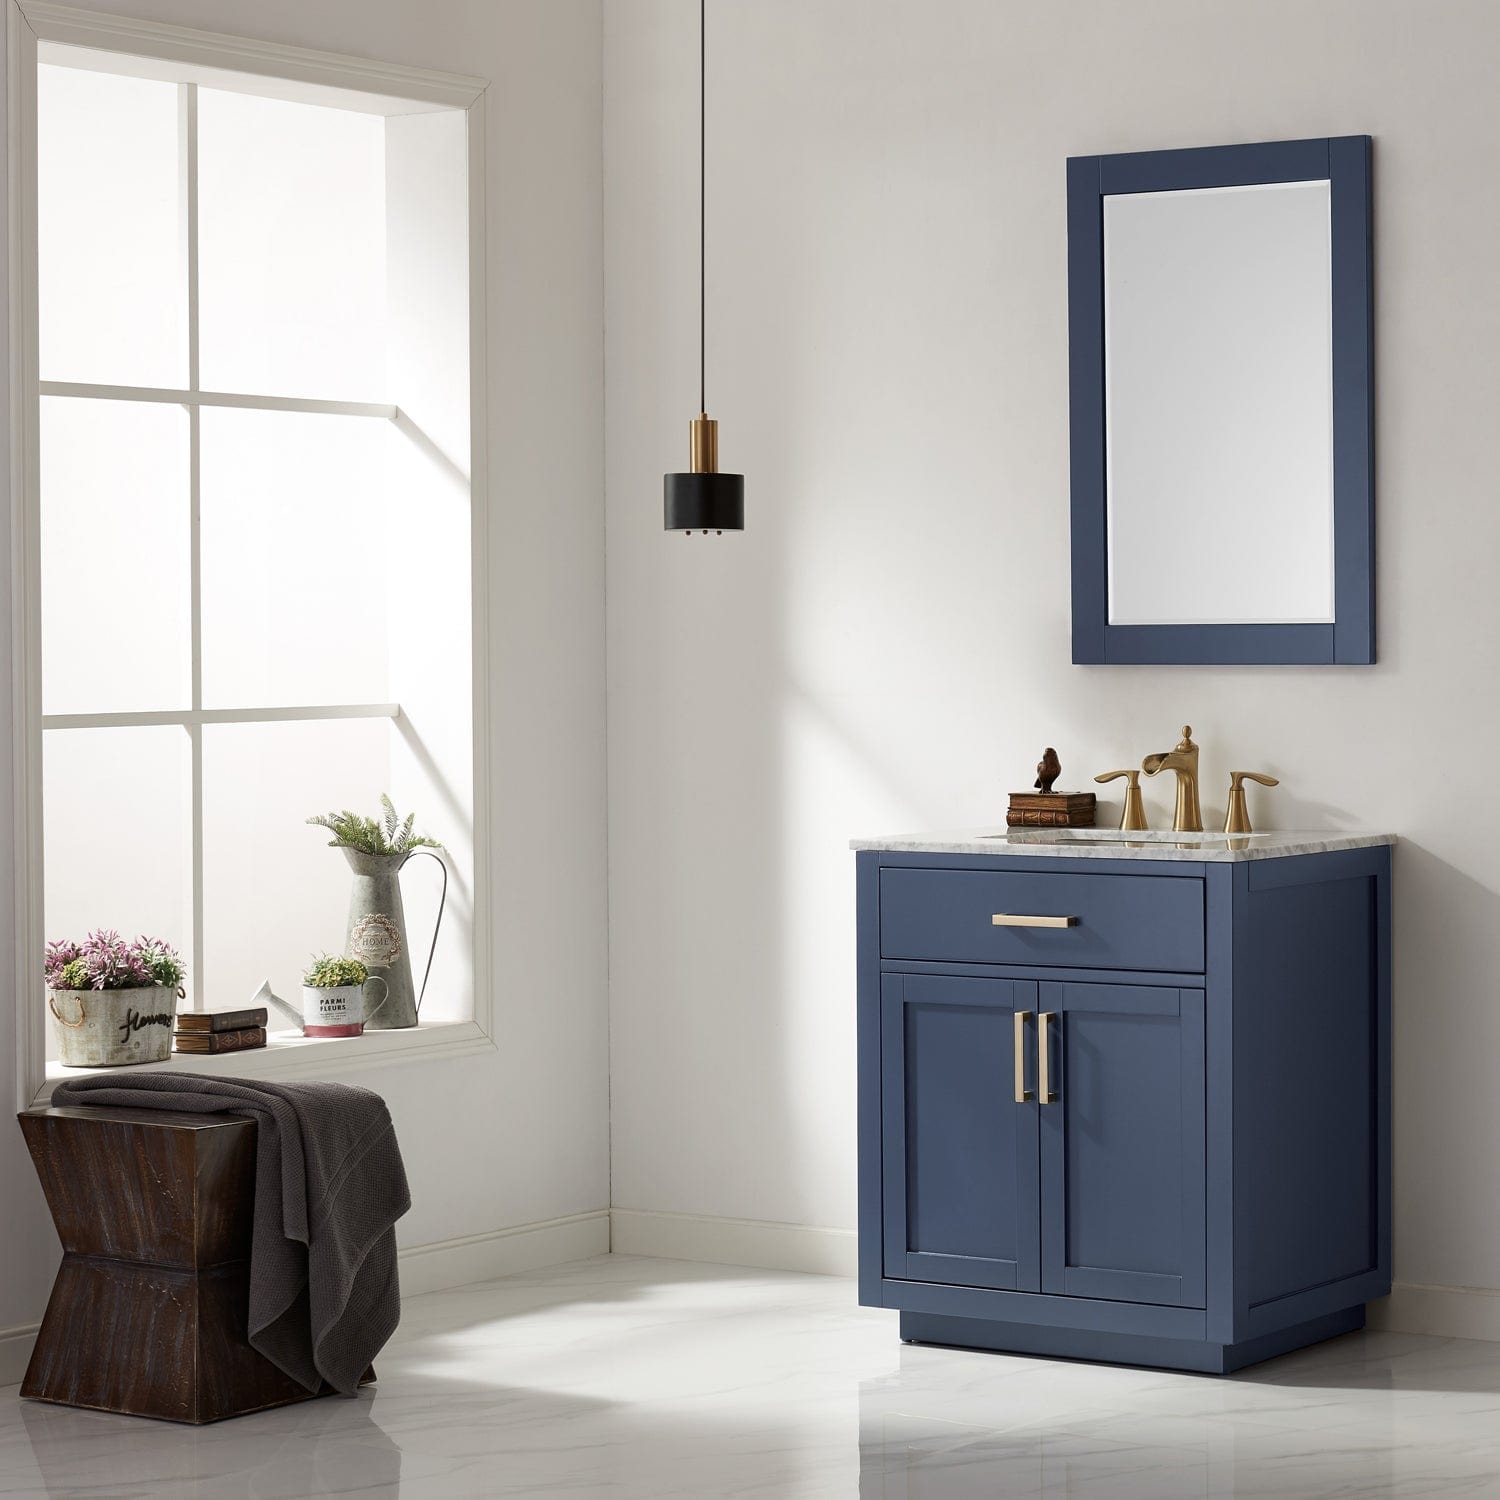 Altair Ivy 30" Single Bathroom Vanity Set in Royal Blue and Carrara White Marble Countertop with Mirror 531030-RB-CA - Molaix631112971058Vanity531030-RB-CA